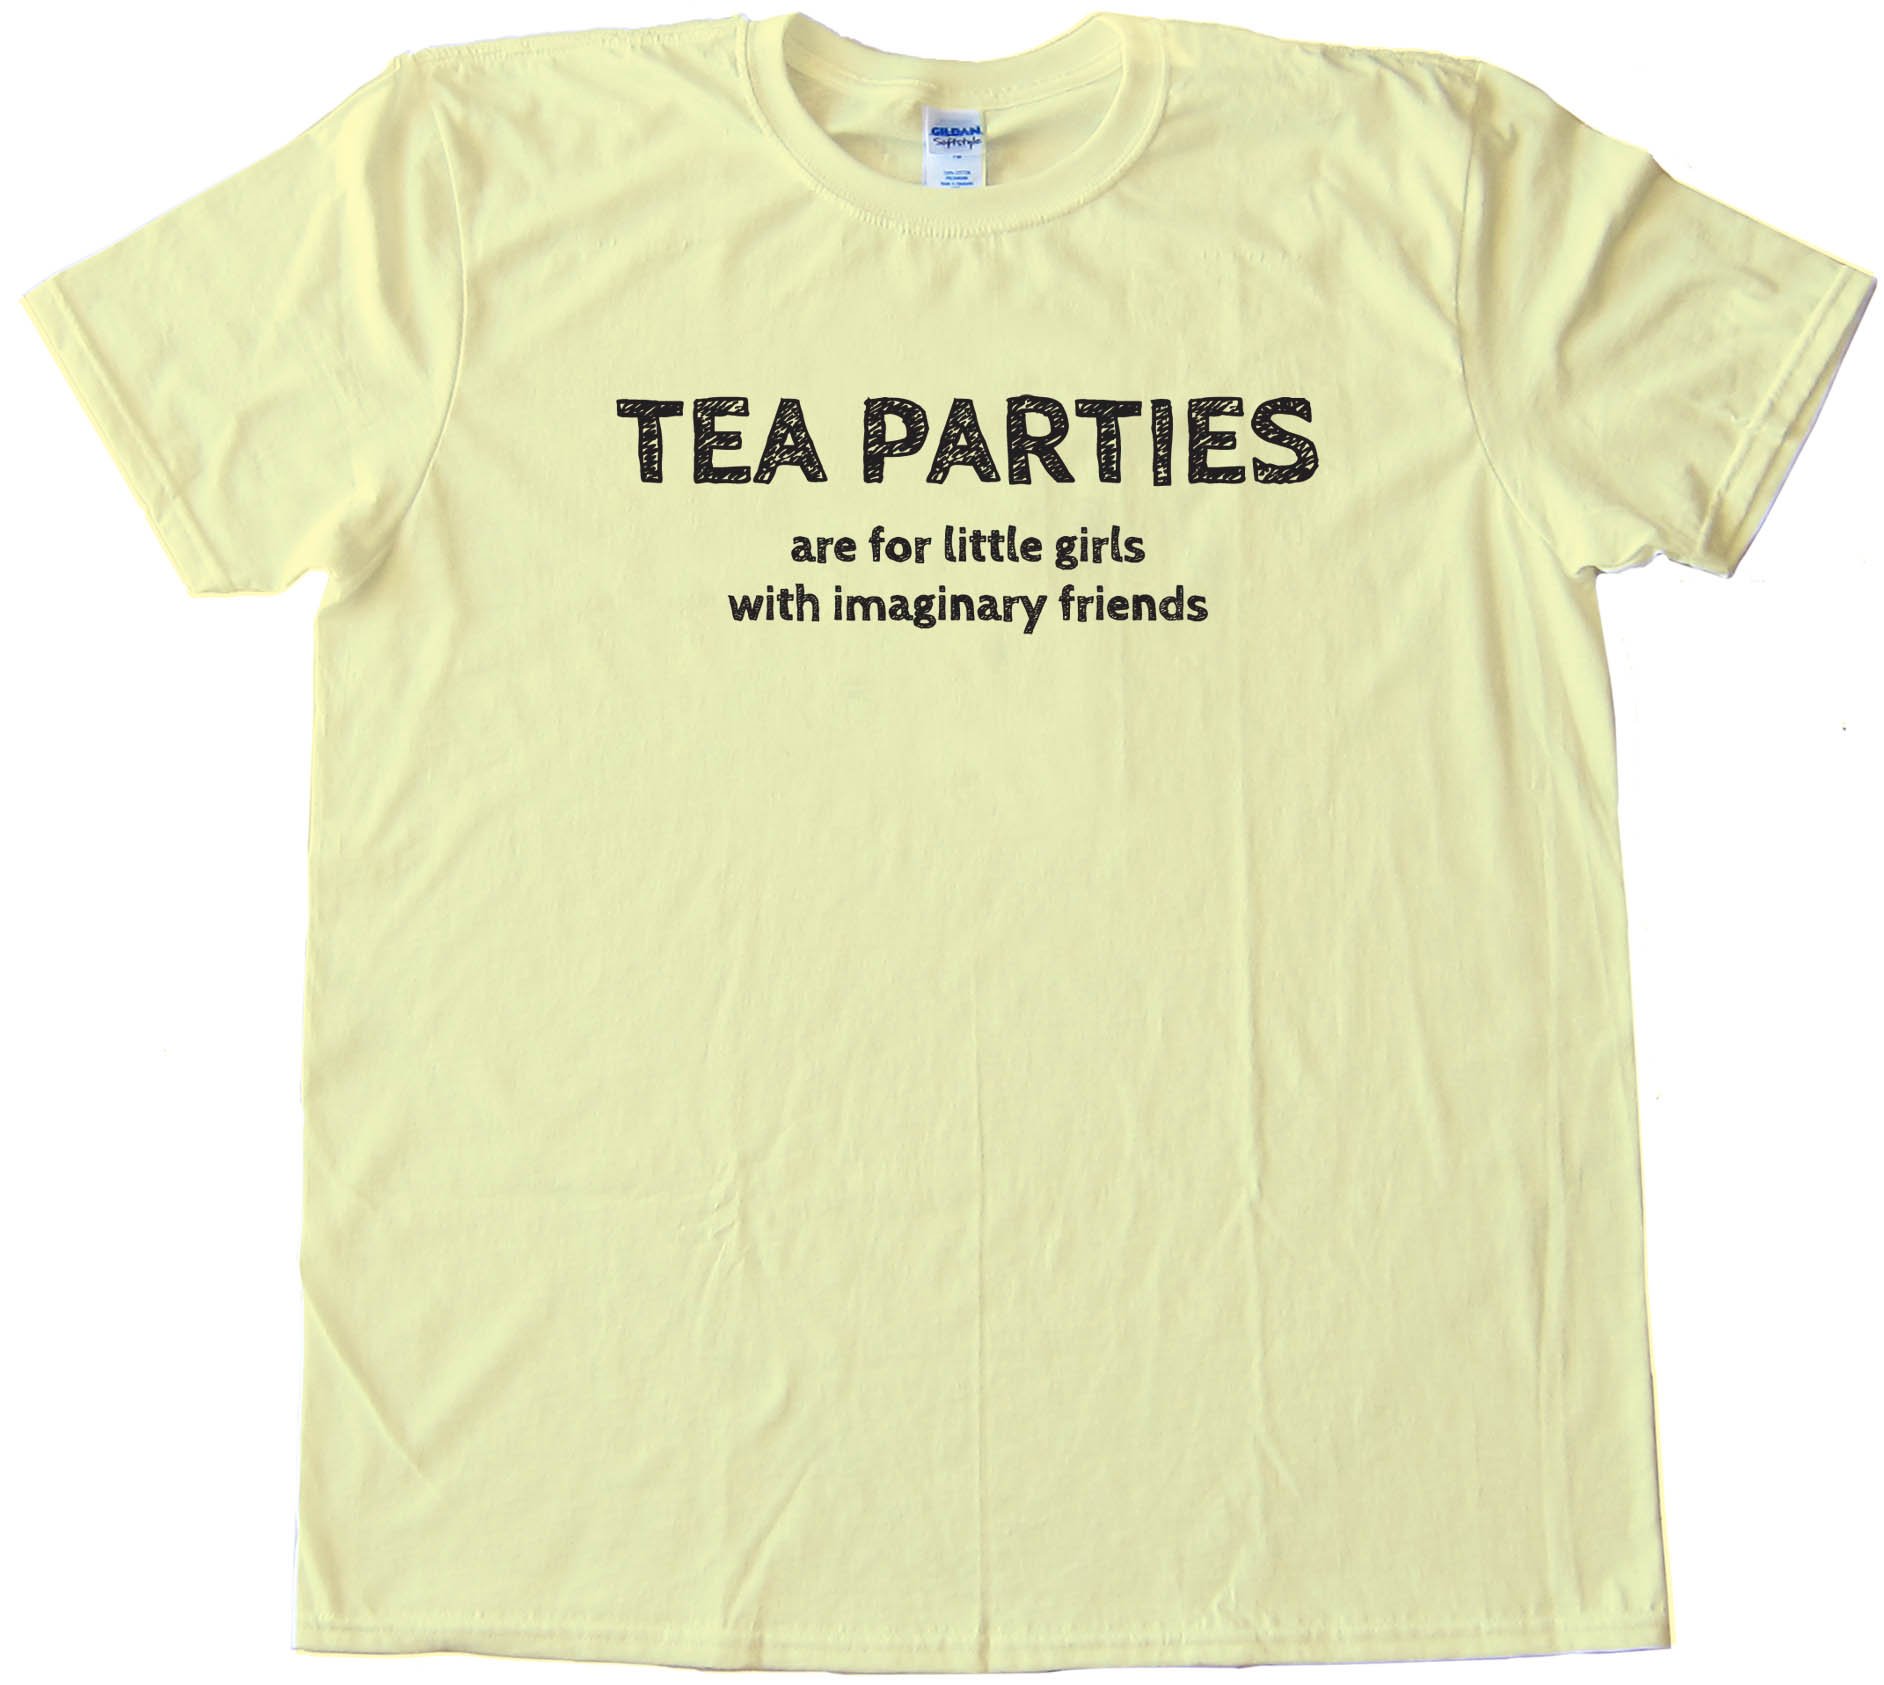 Tea Parties Are For Little Girls With Imaginary Friends -Tee Shirt